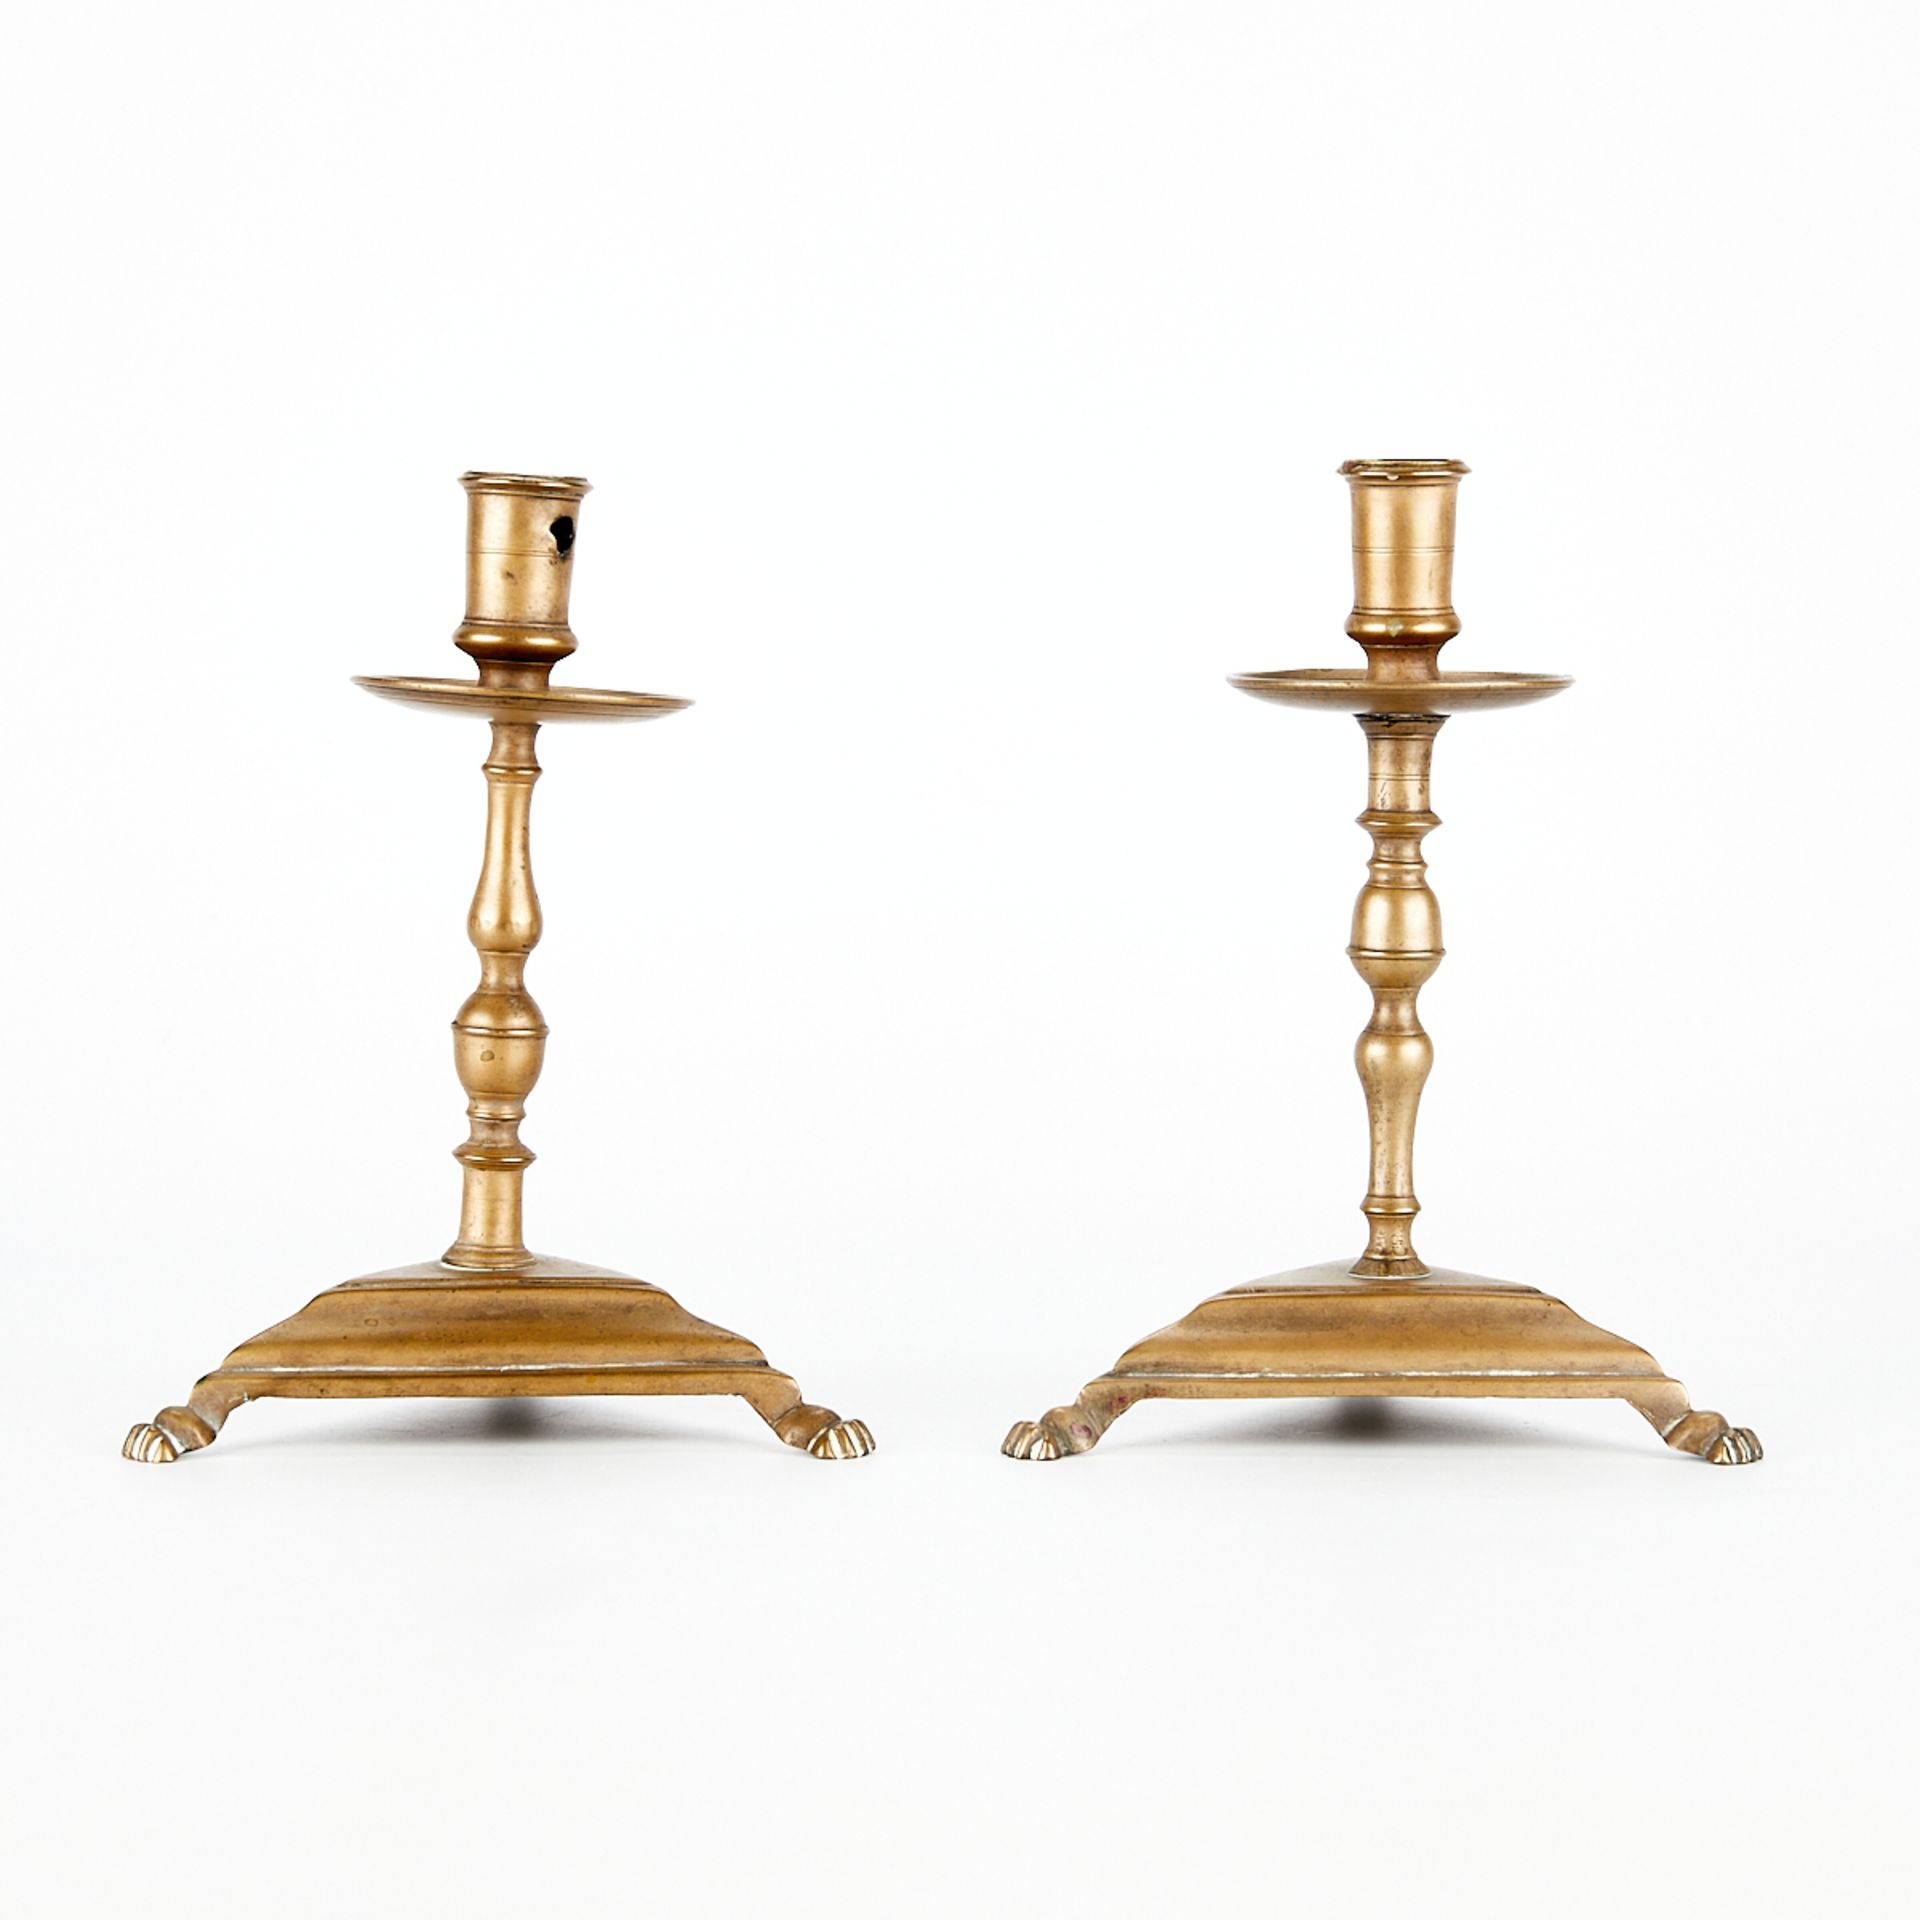 Pair of 17th c. Brass Spanish Candlesticks - Image 4 of 8